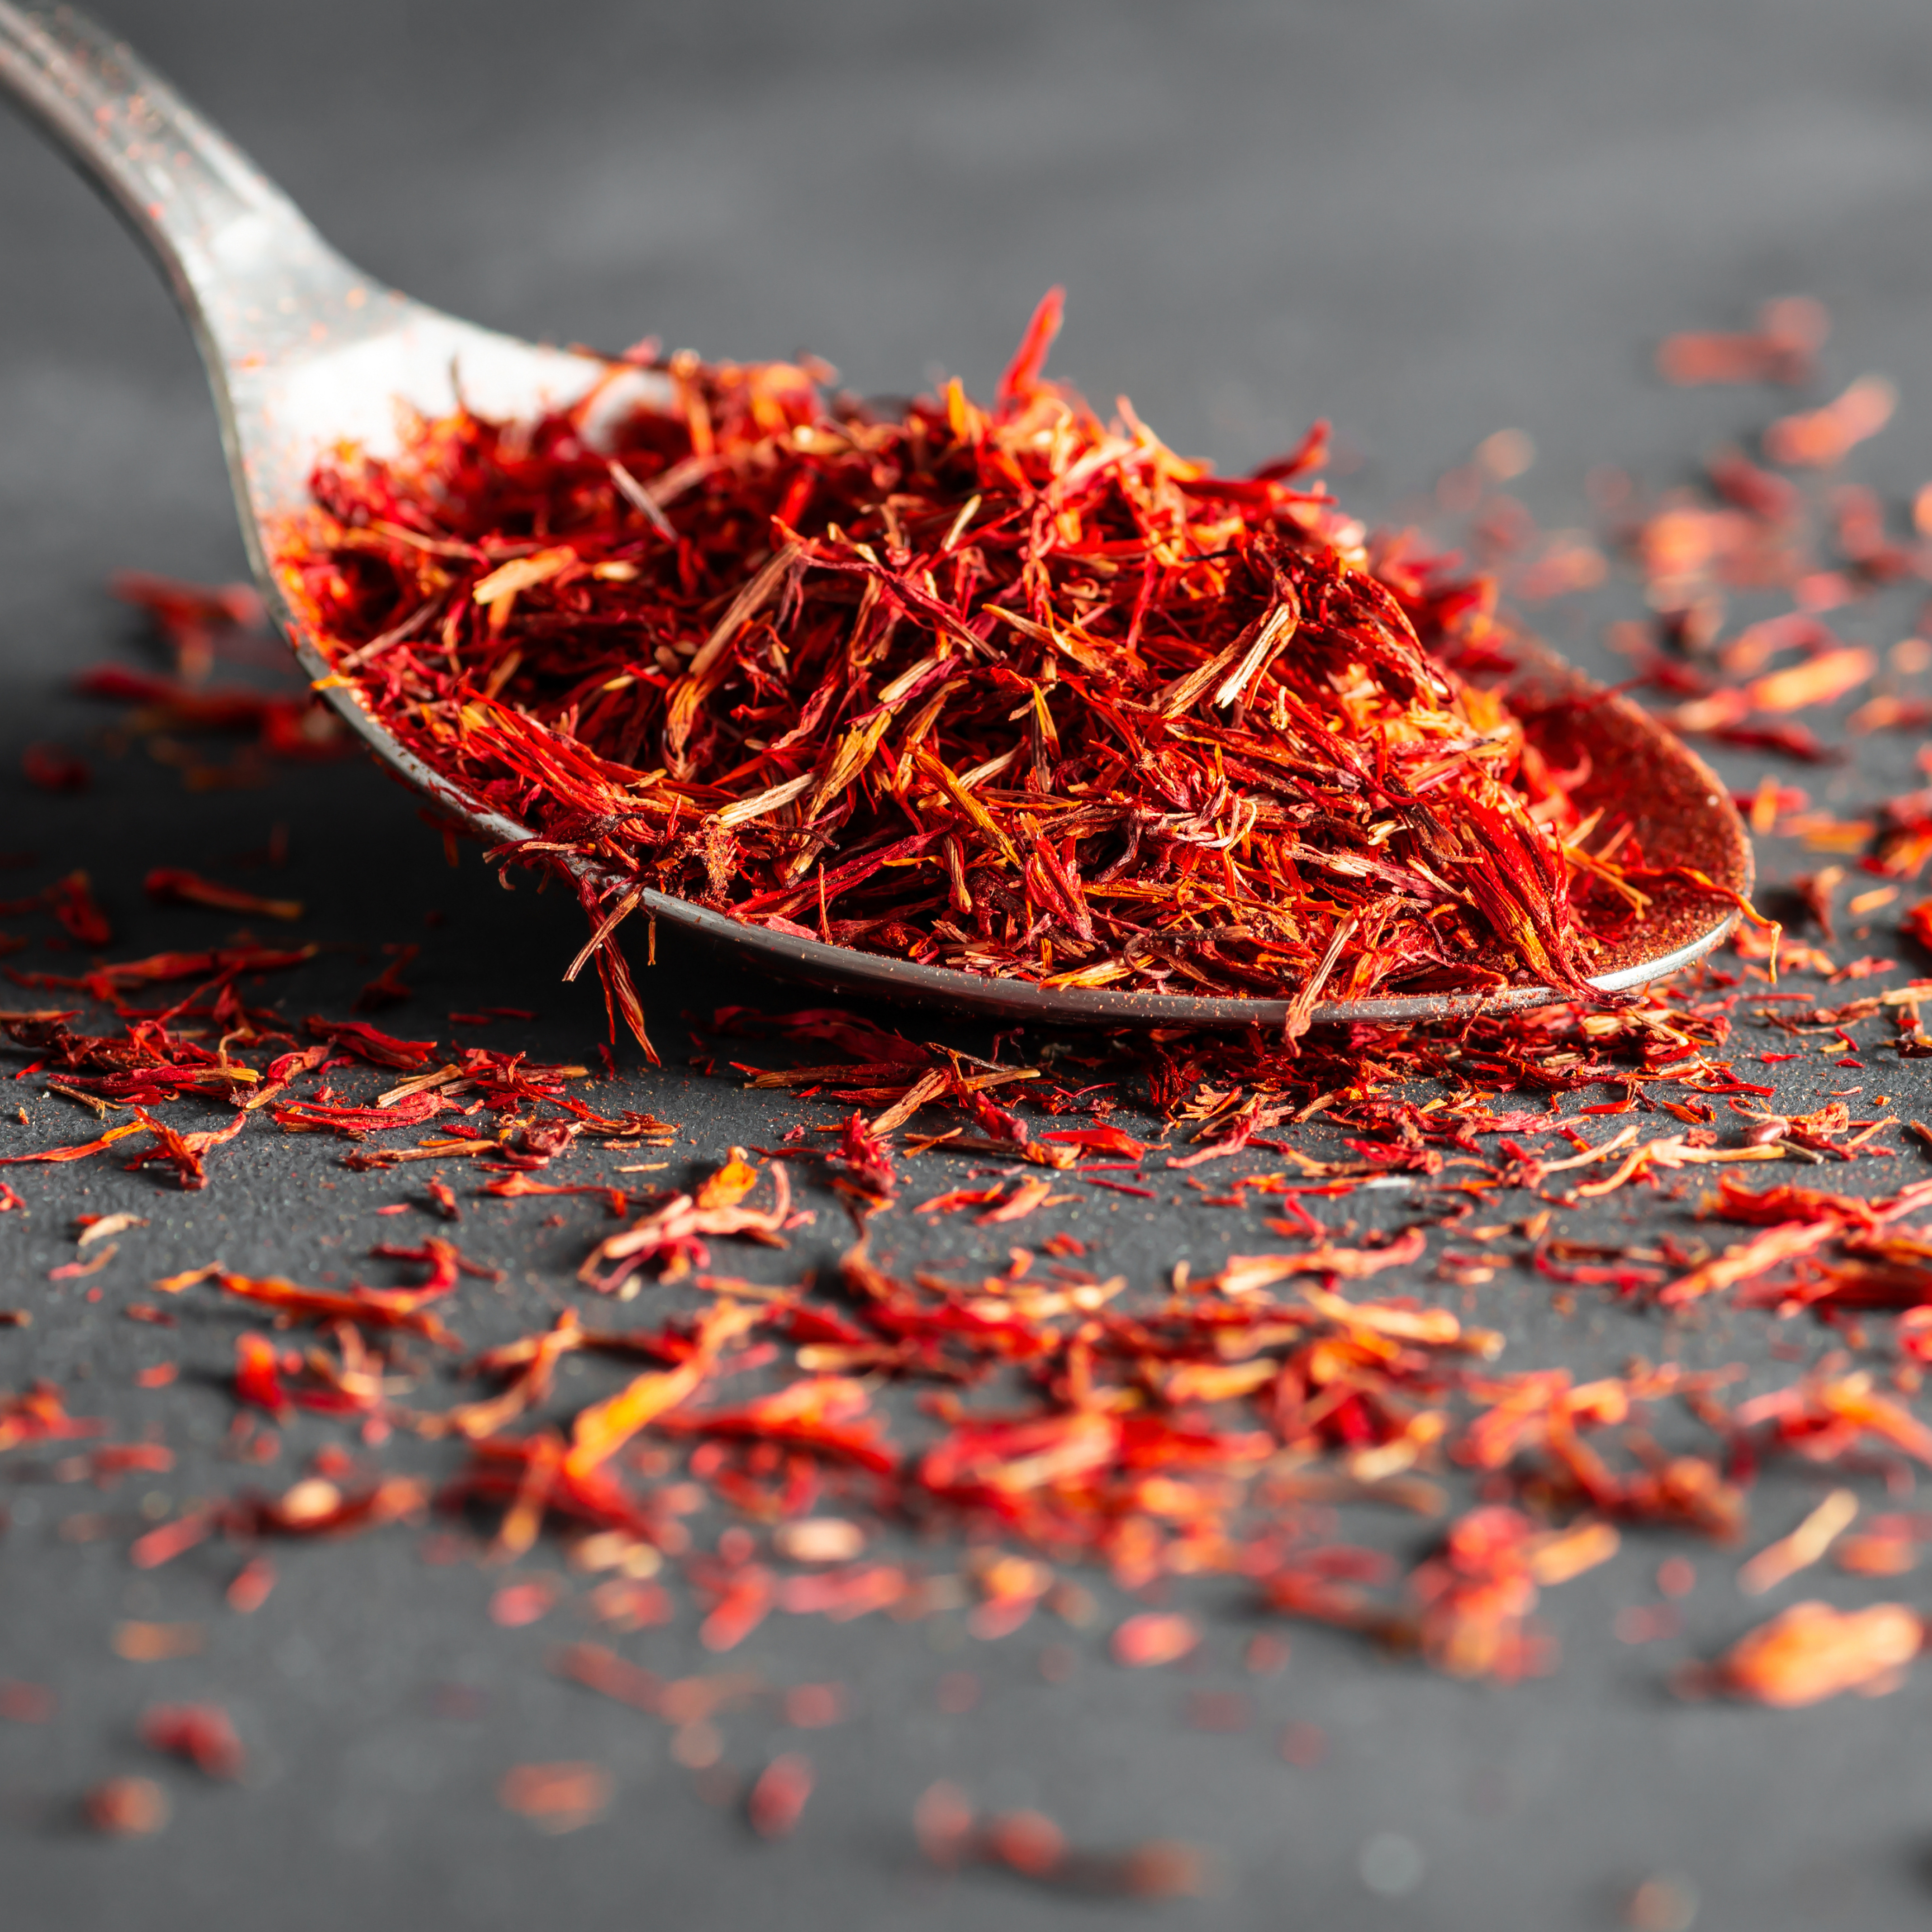 A spoon of saffron spice on a table